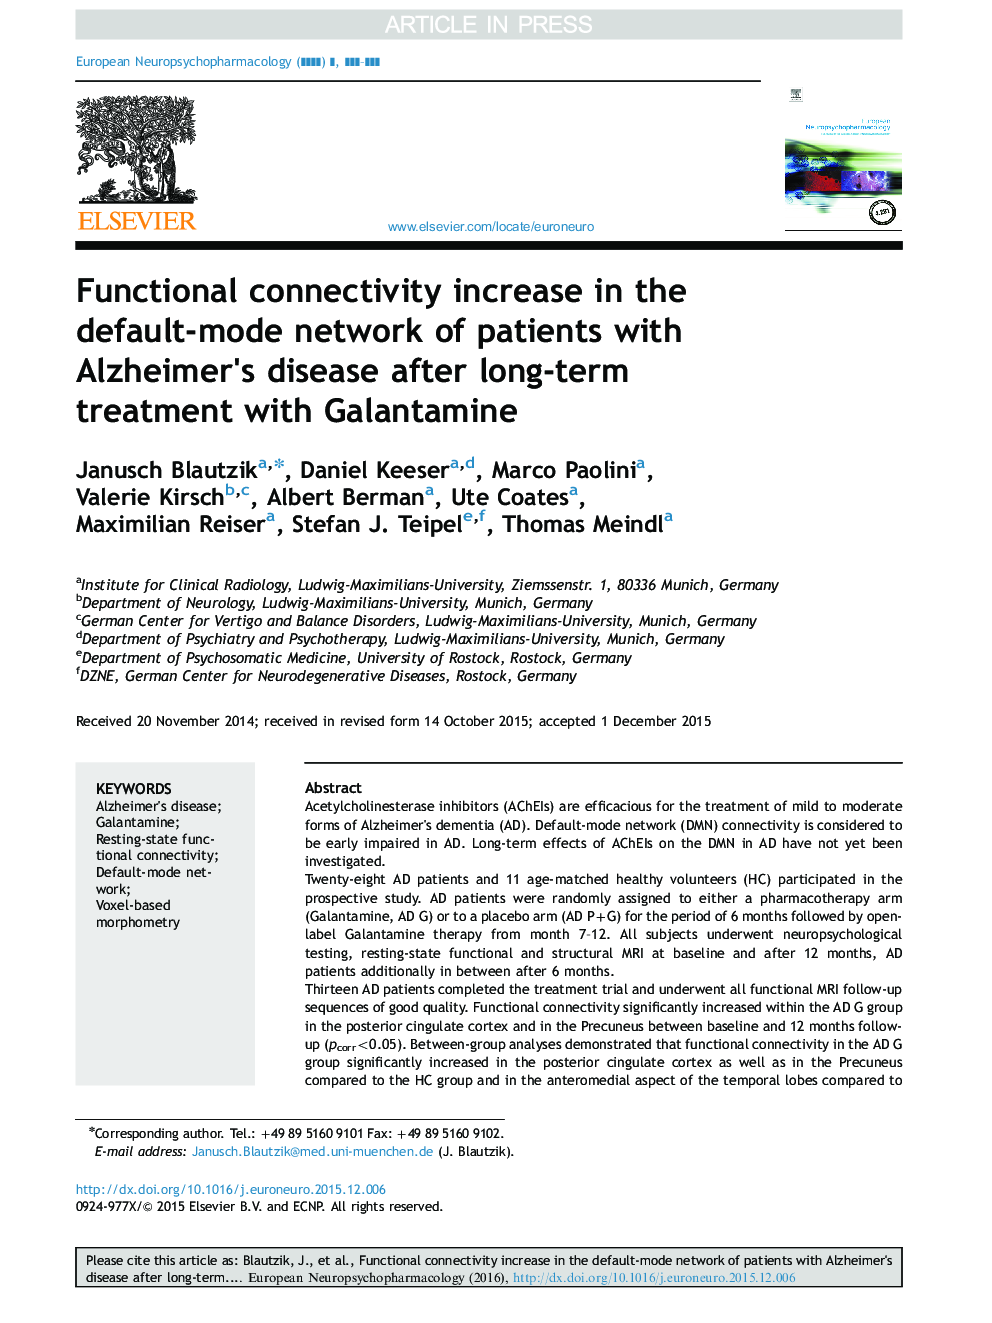 Functional connectivity increase in the default-mode network of patients with Alzheimer×³s disease after long-term treatment with Galantamine